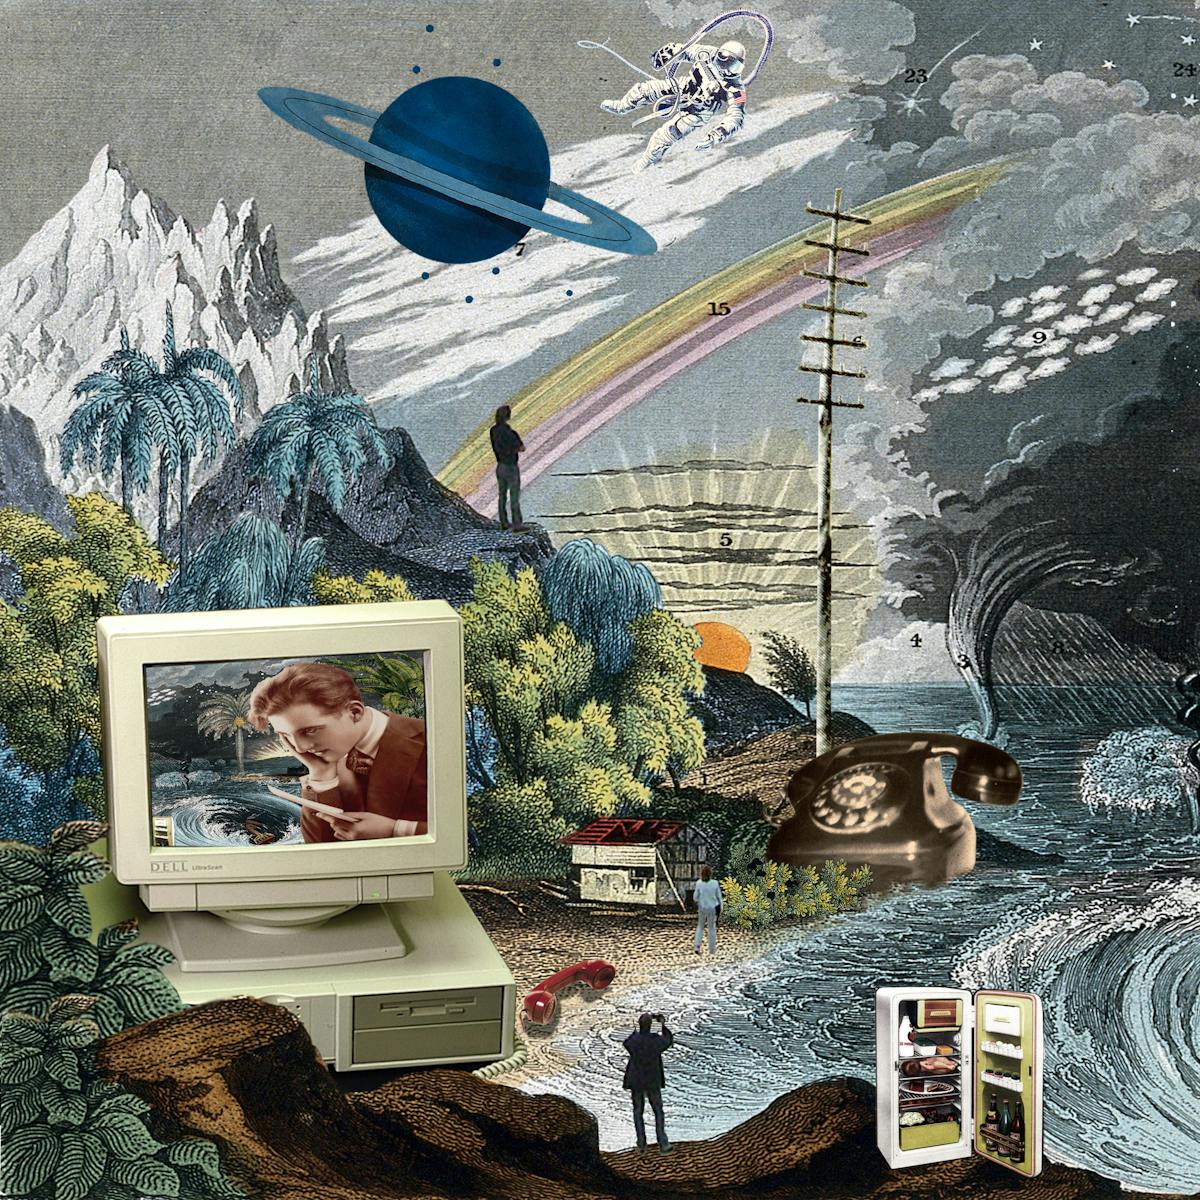 Artwork using collage. The collaged elements are made up of archive material which includes vintage and contemporary photographs, etchings, painted illustrations, lithographic prints and line drawings. This artwork depicts a scene from a costal landscape. To the right of the image a large figure of a man wearing a suit and tie rests his head on his right hand, while holding a letter in his left. He stares across the frame to the left. Behind him the background is an expanse of ocean which meets a sandy shoreline. At sea can be seen stormy weather with tornadoes, and dark clouds. On the shoreline trees rise up into snow capped mountains. The silhouette of a small figure stands of the mountain looking out to sea. Also peppering the shore are a rotary telephone, a telegraph pole and a small wooden house. In the water is a large whirlpool with a tall ship disappearing into the depths. Along the foreground are an open refrigerator containing food and an old computer screen. On the screen is a repetition of this collage. In the sky above the scene are an airliner in flight, a blue Saturn-like planet, an astronaut on a space walk, a rainbow and a sunset.